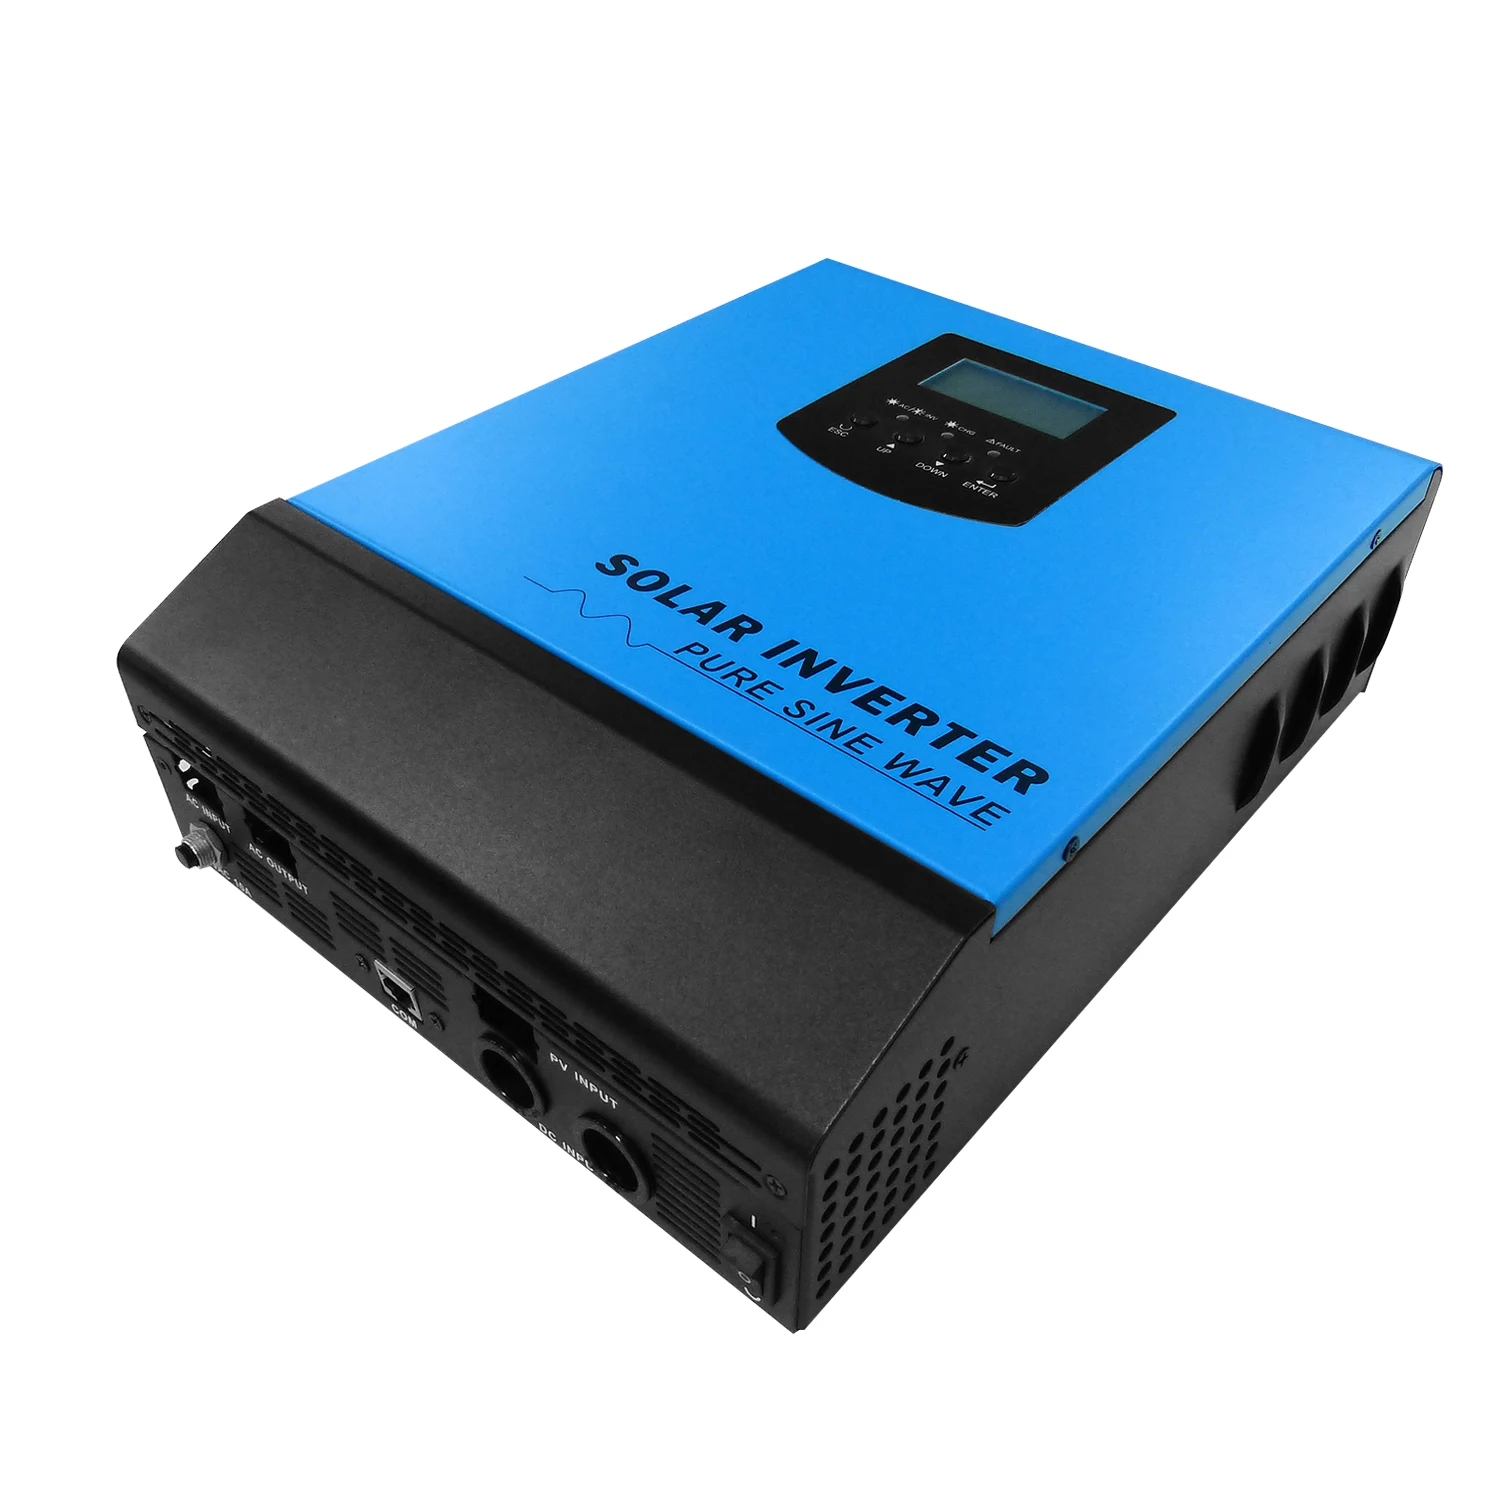 

5KVA 5KW 5000W 48V 220V High Frequency Inverter DC To AC Pure Sine Wave Hybrid Solar Power Inverter With 60A MPPT Controller